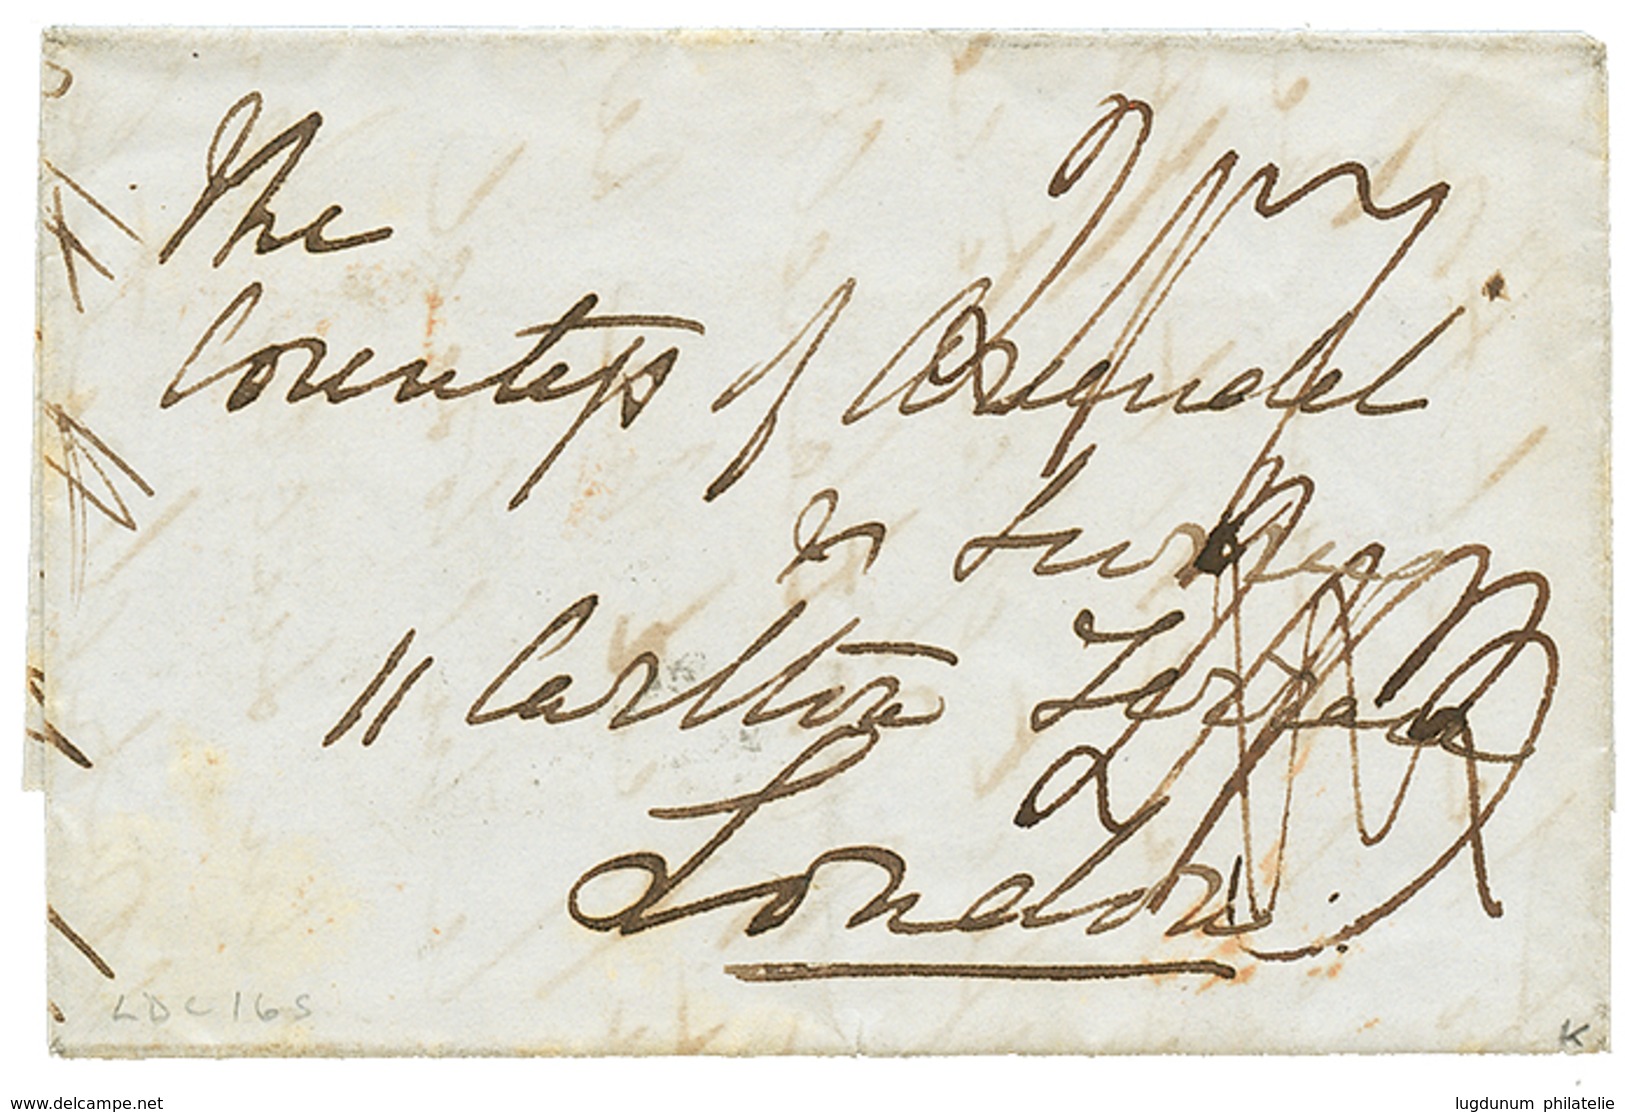 1849 SINGAPORE/Bearing On Reverse Of Entire Letter To ENGLAND. Rare So Nice. Superb. - Straits Settlements